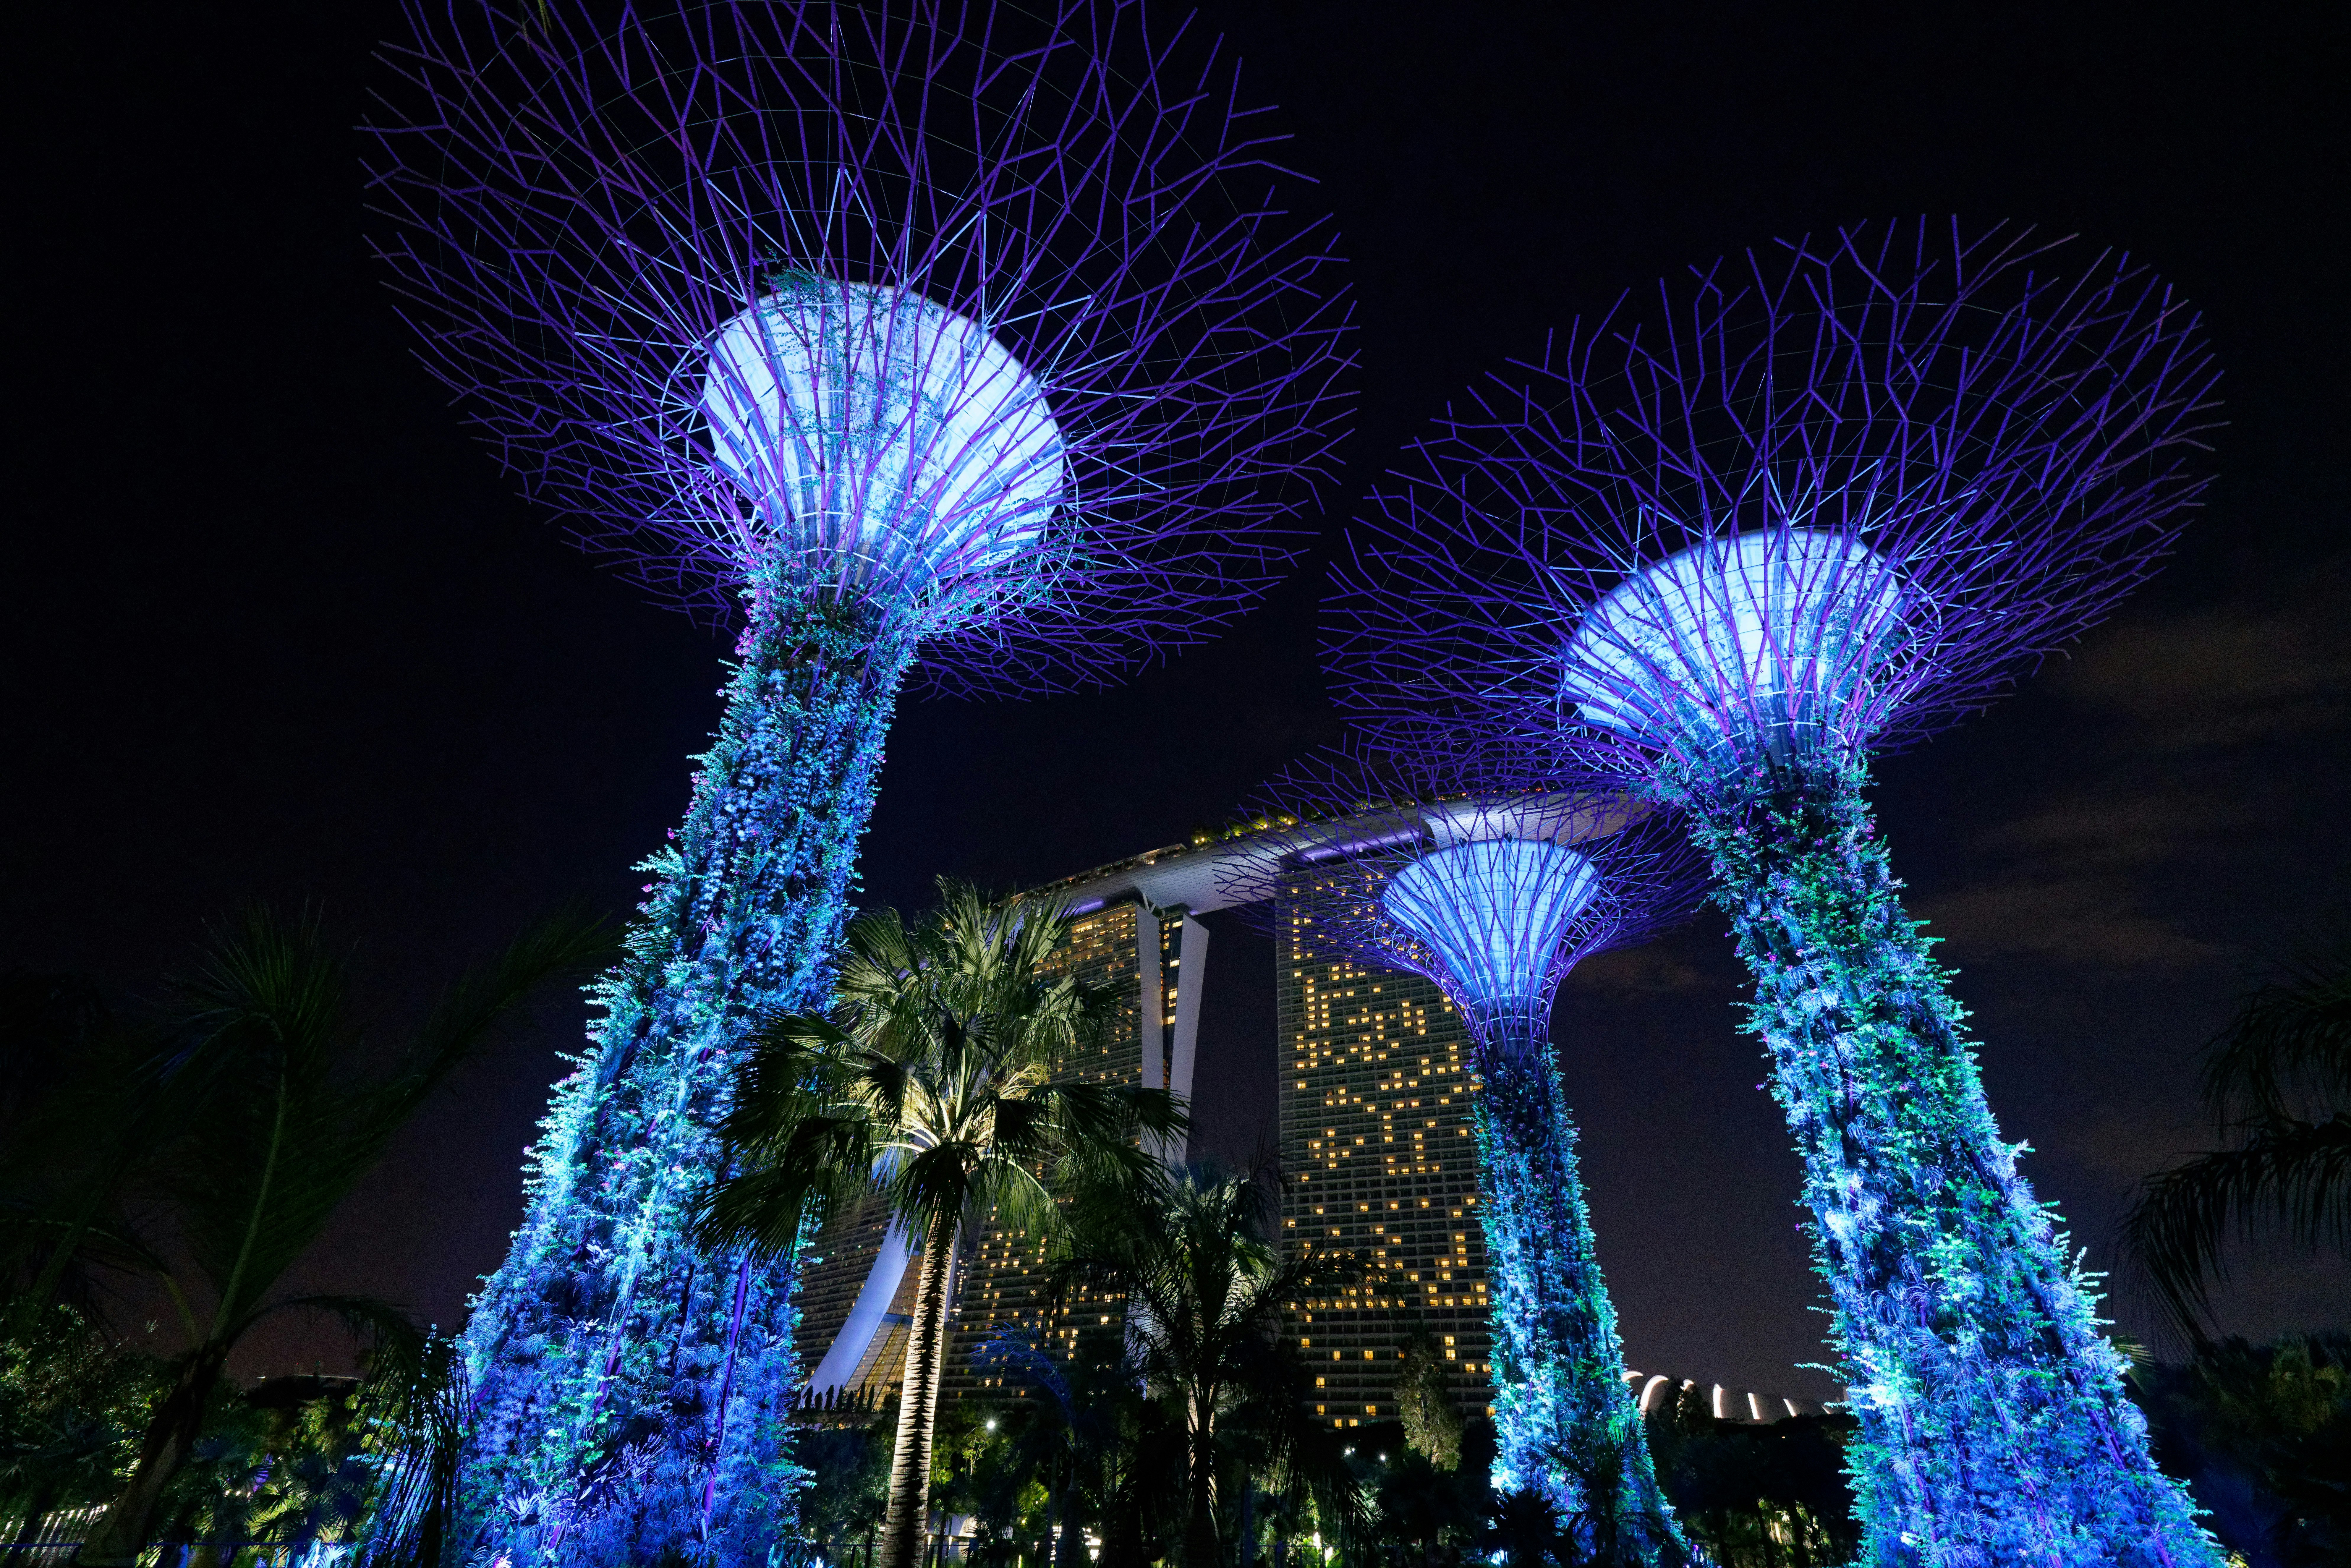 Gardens by the bay at night